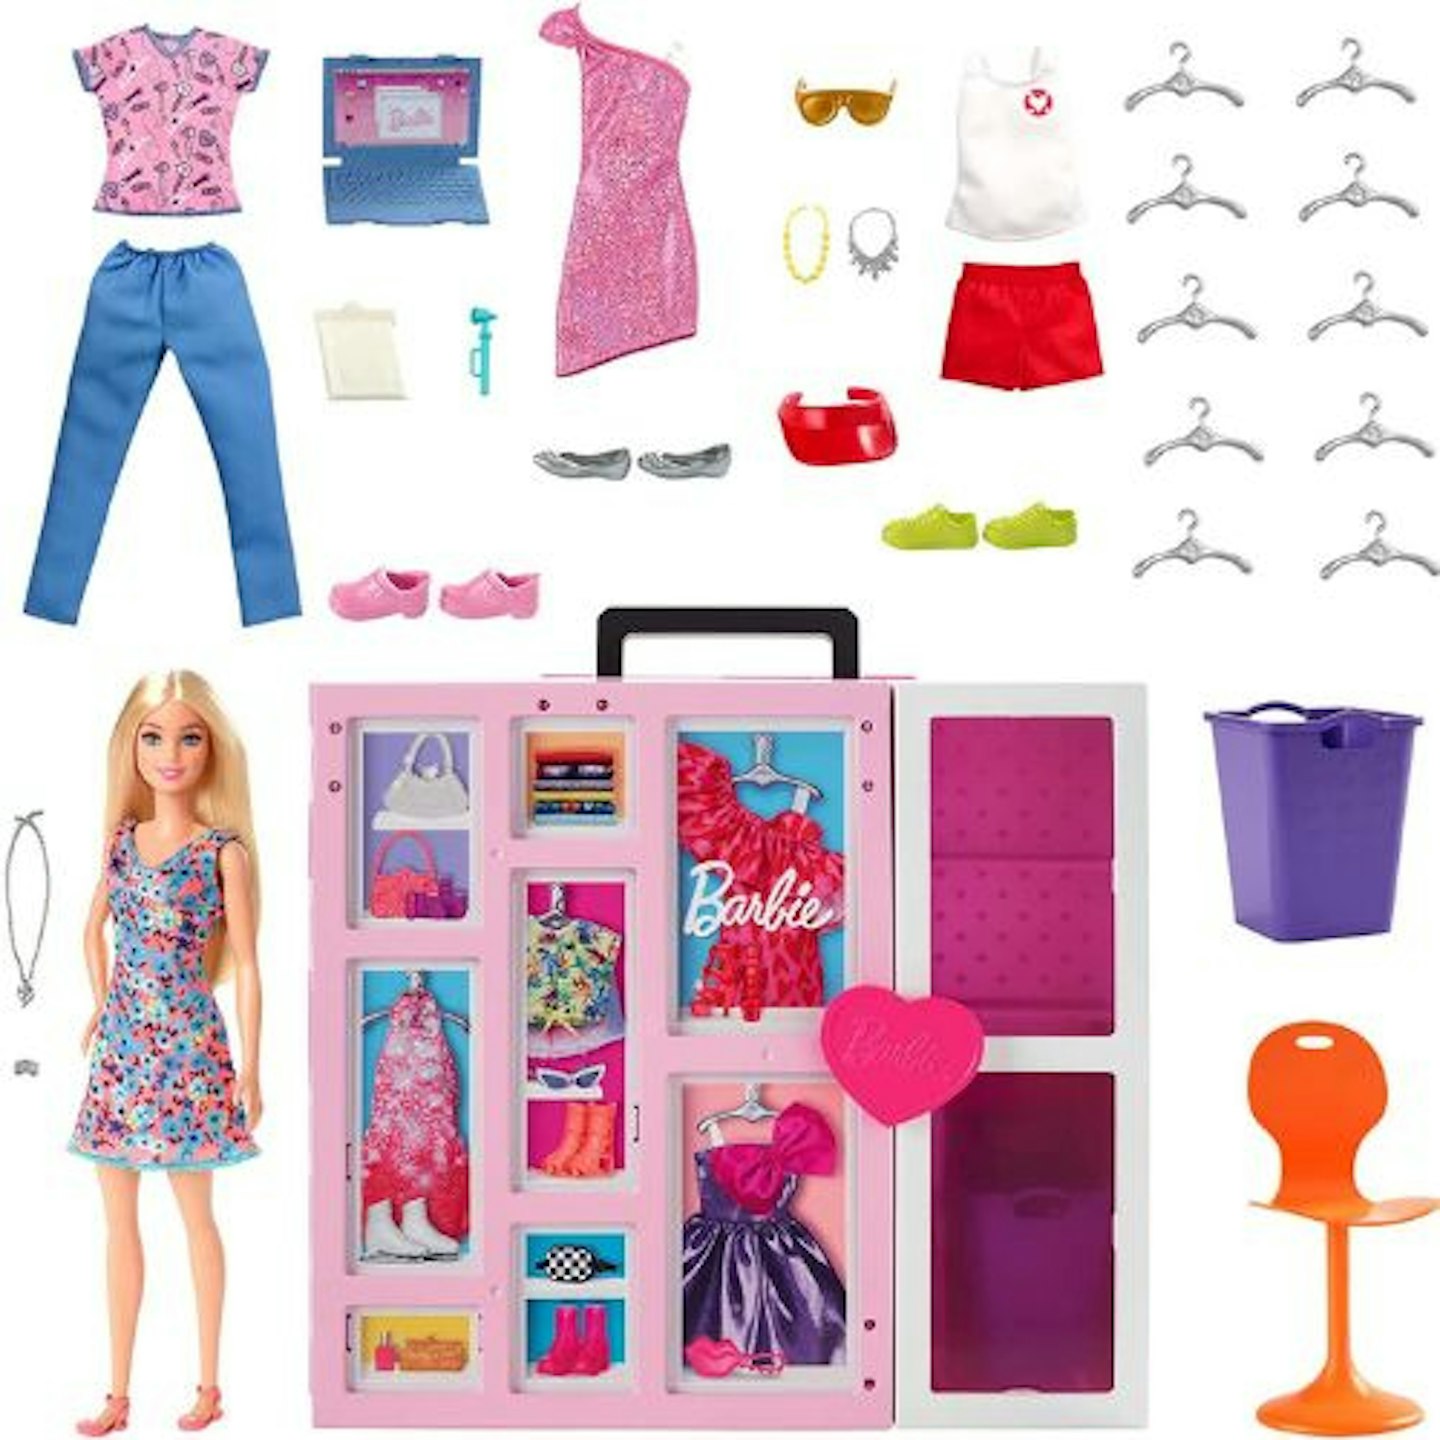 Best Barbie Toys : Barbie Doll and Dream Closet Set with Clothes and Accessories